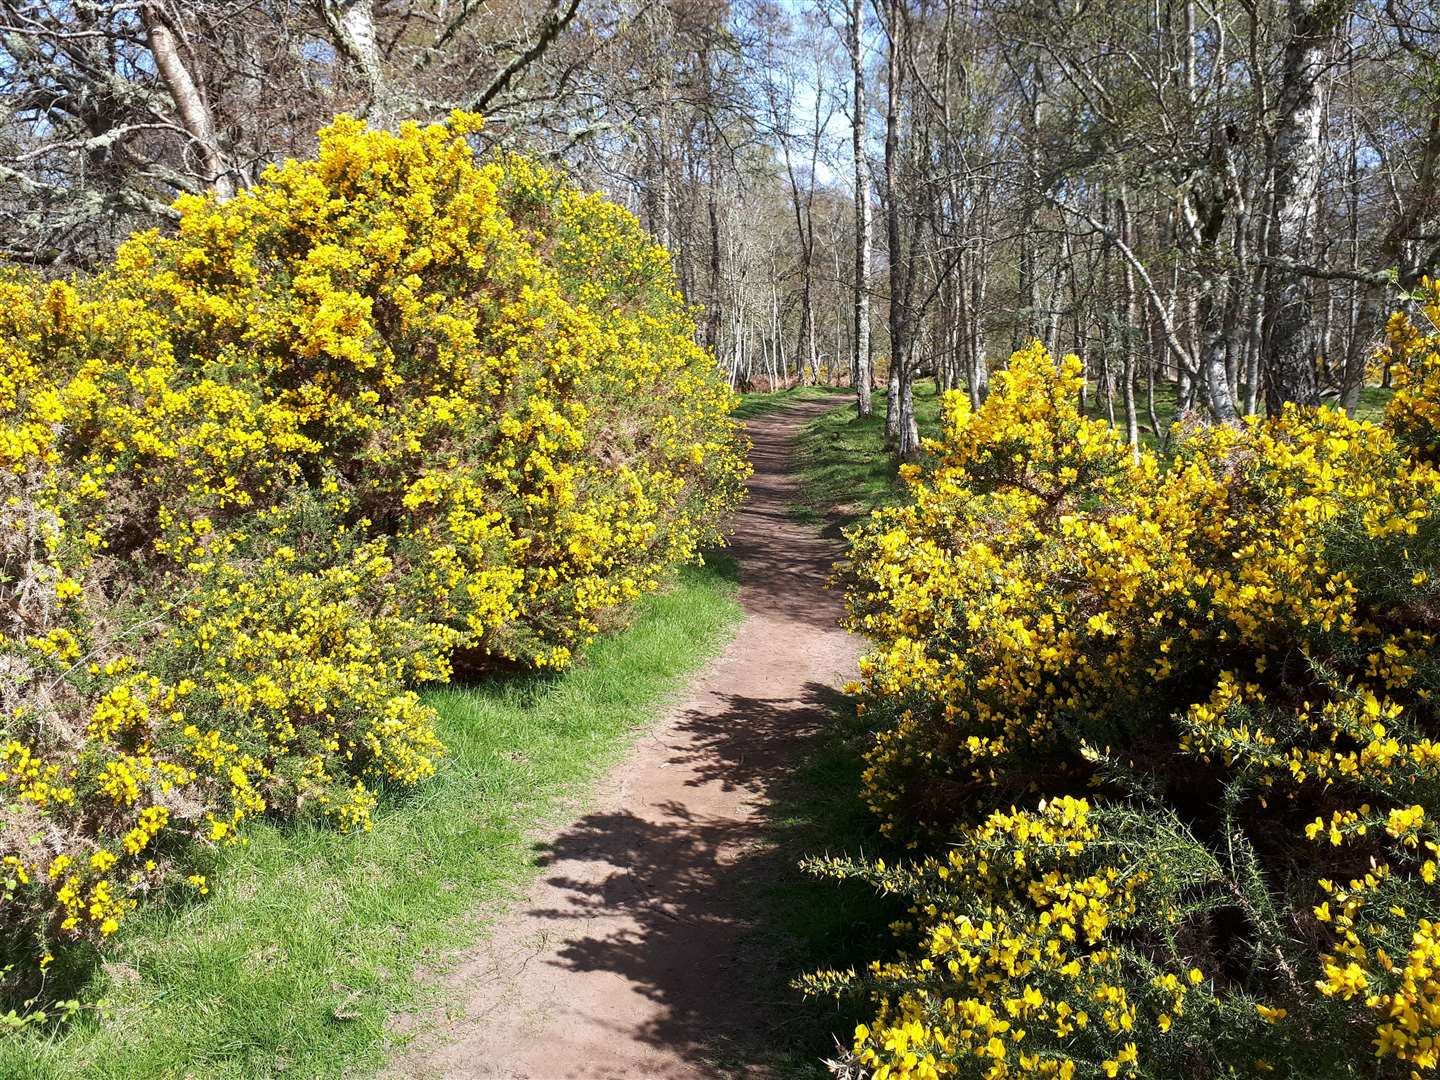 A path leading between two flowering gorse bushes in the woods.